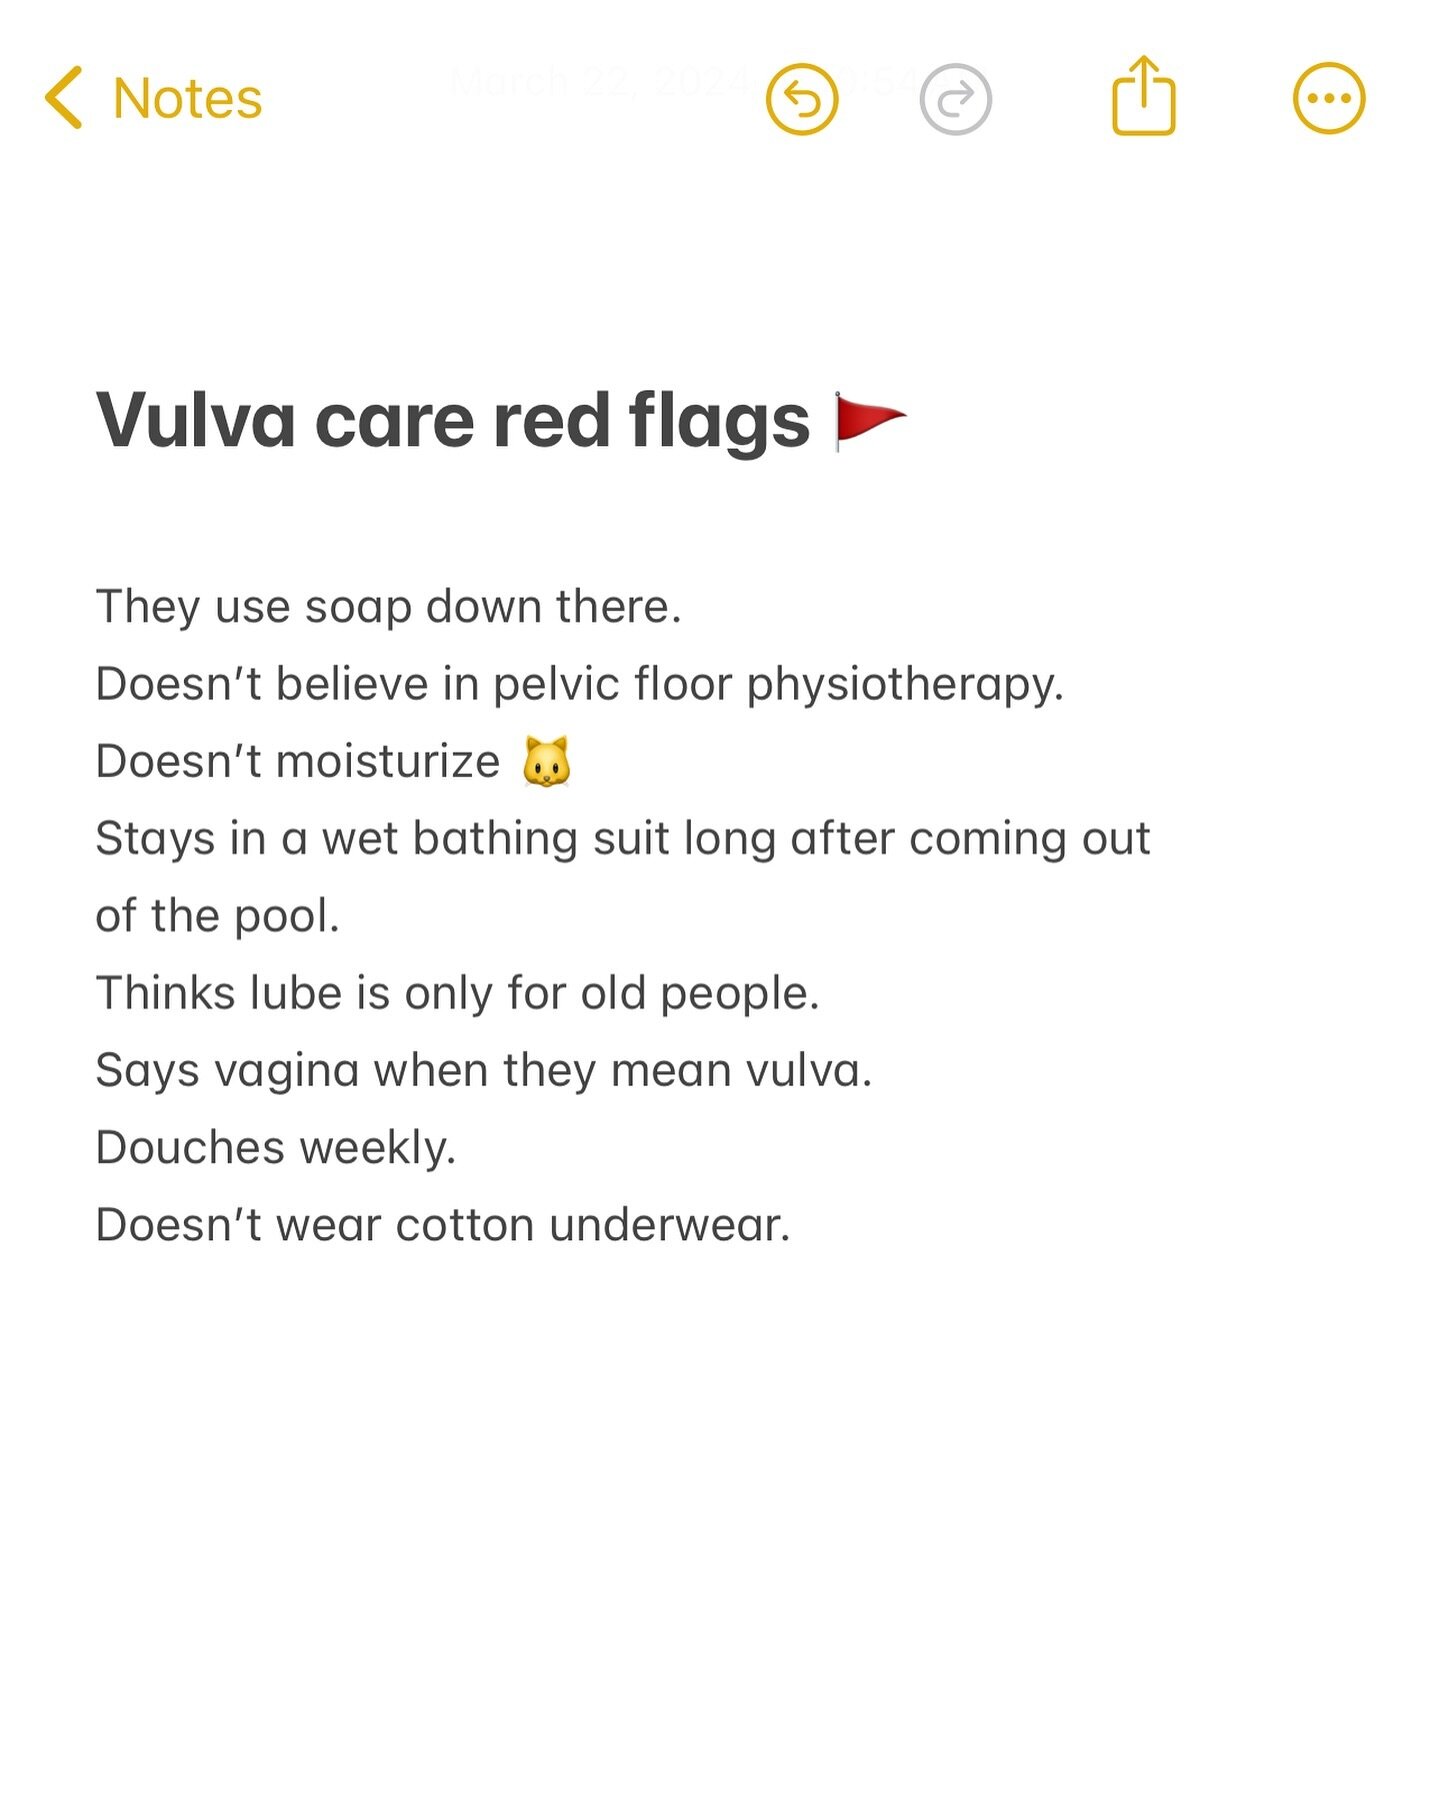 And if someone expects the vulva to smell like roses, that&rsquo;s a definite red flag waving in the breeze of unrealistic expectations. 

Got any more red flags 🚩to add?